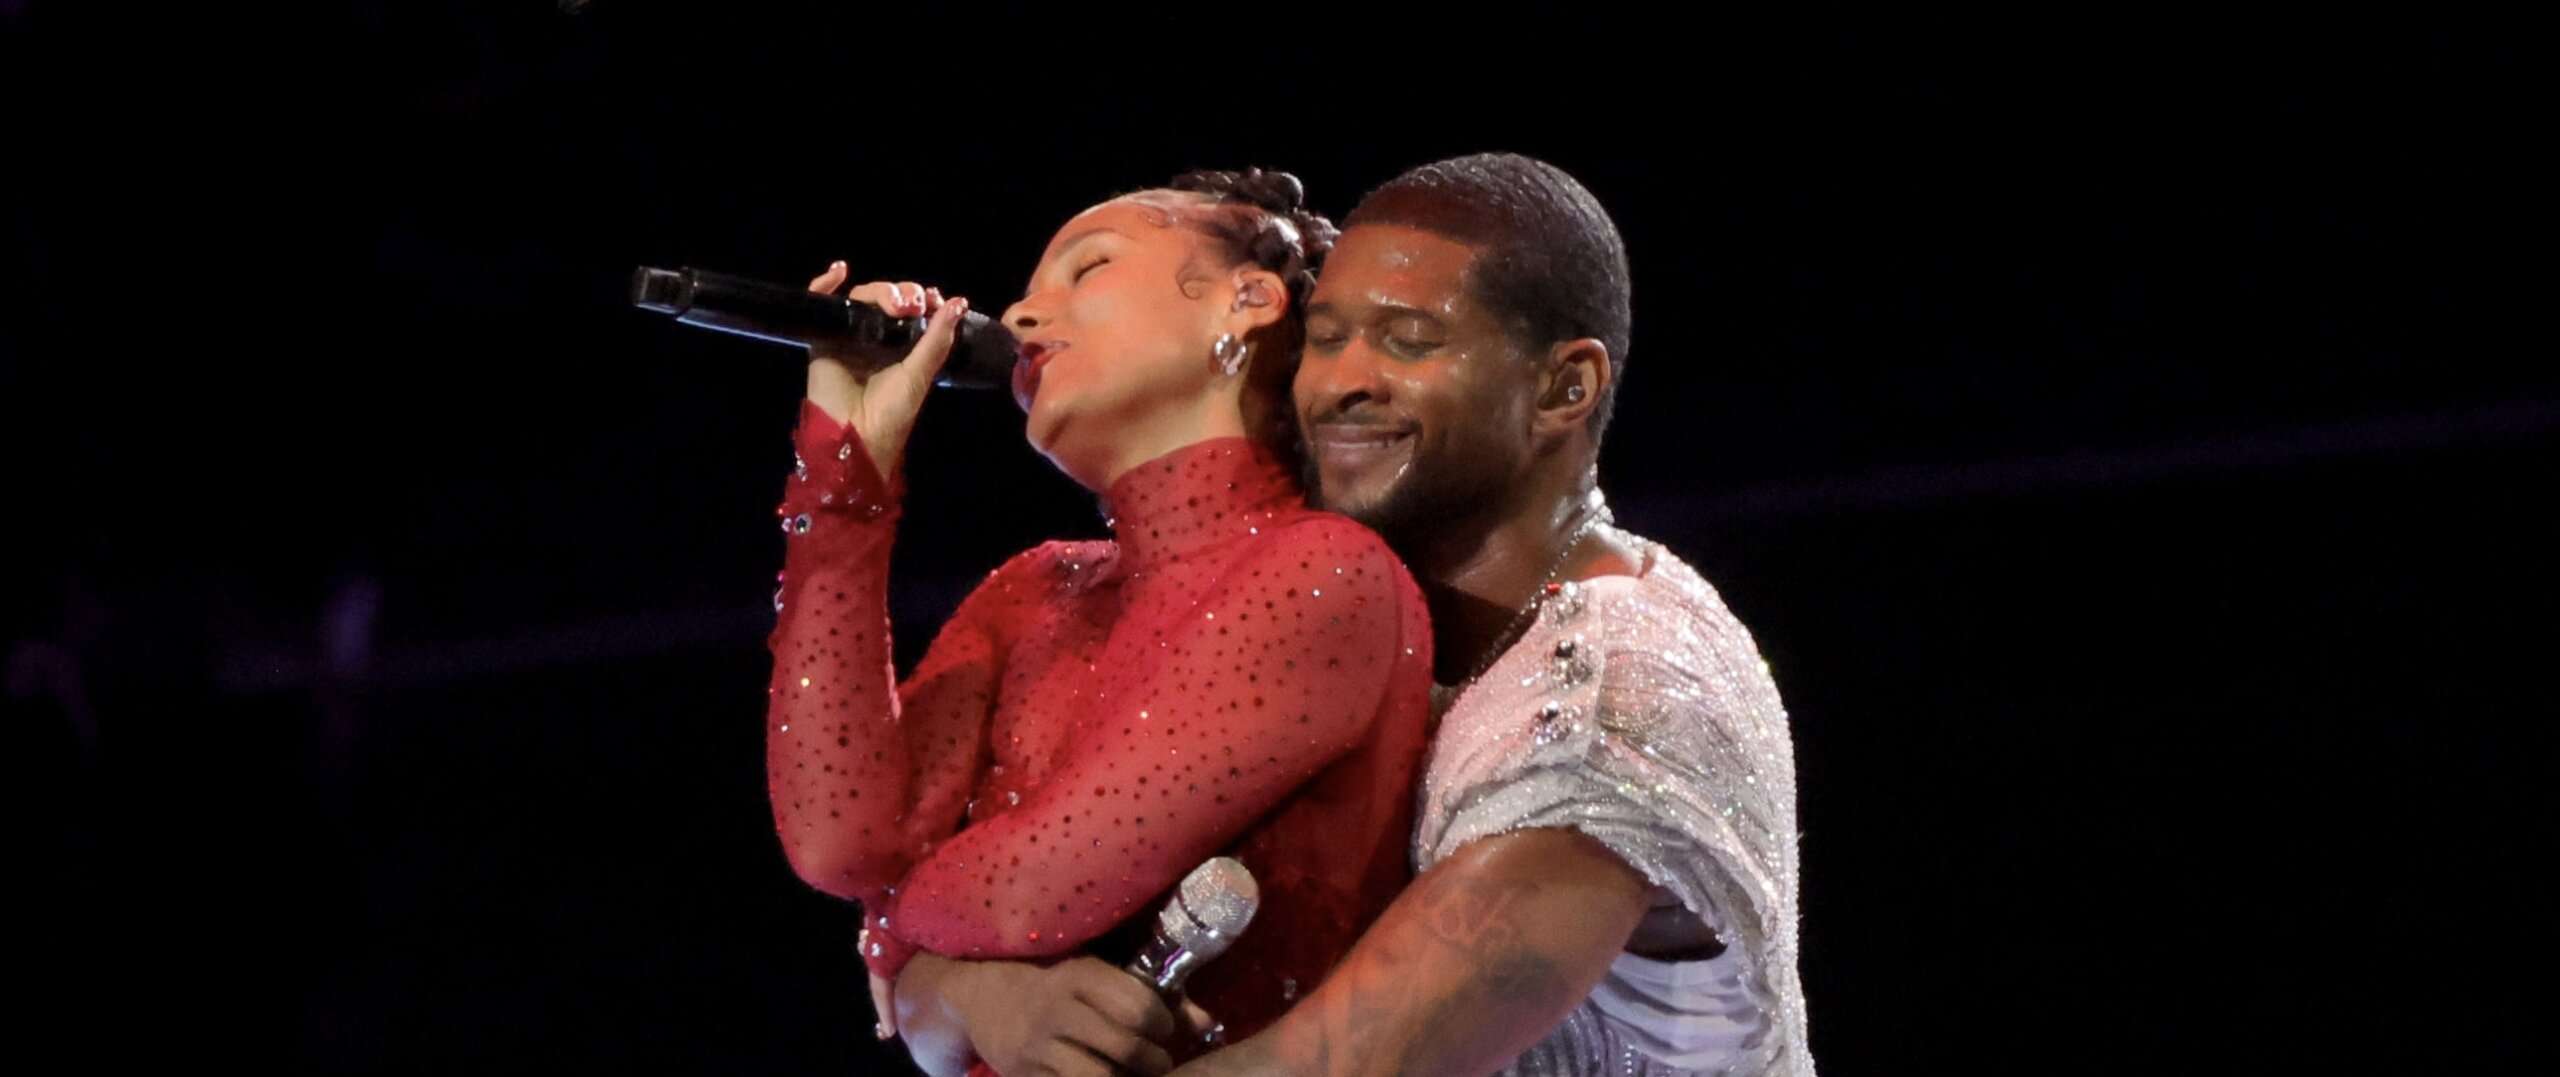 Usher and Alicia keys my boo at the Super Bowl